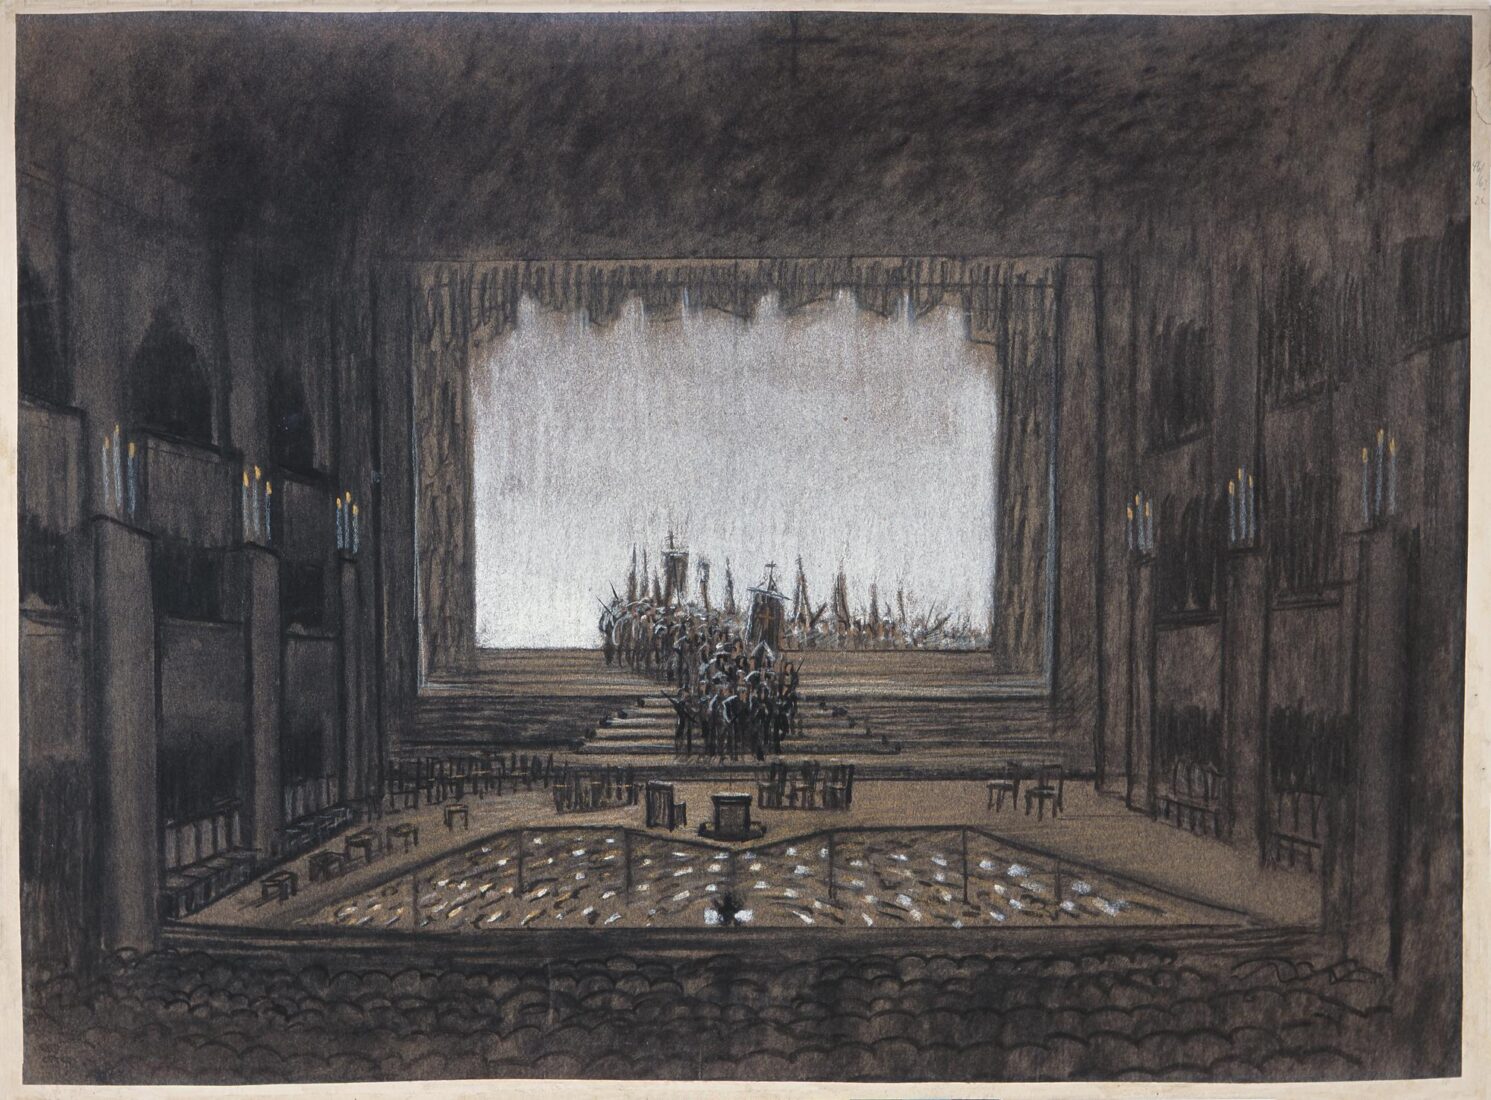 The Π-Shaped Front Stage with the Narrator’s Pulpit, the Procession of the Lancers, the Banners of Castile and Aragon and the Chorus in the Backstage” - Aravadinos Panos